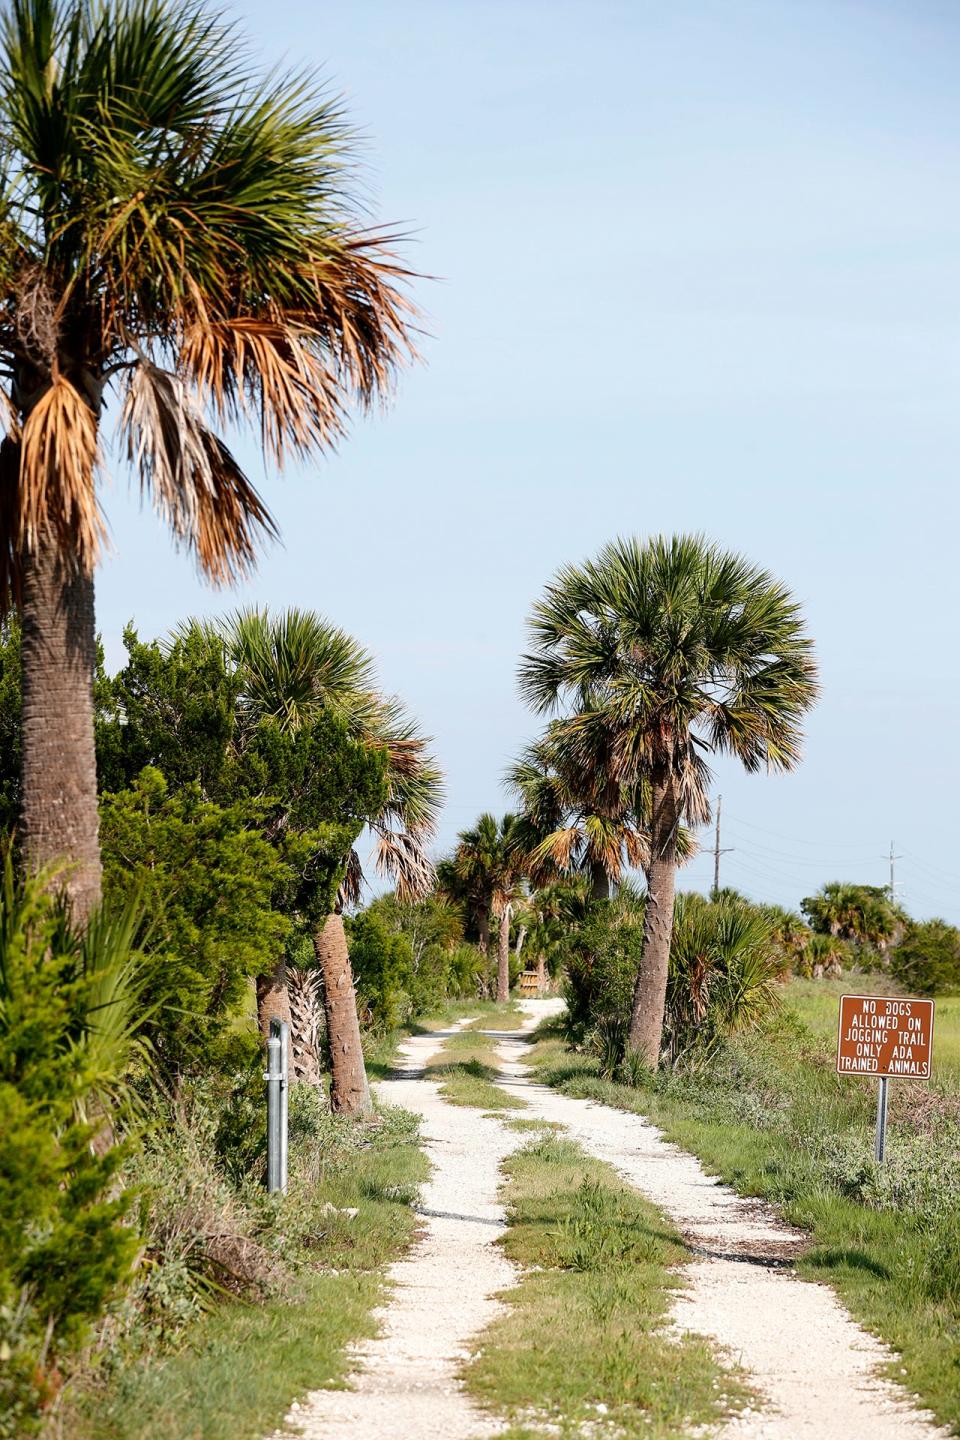 The McQueen's Island Trail winds through the palms and marsh along the bed of the former Central of Georgia Railway.